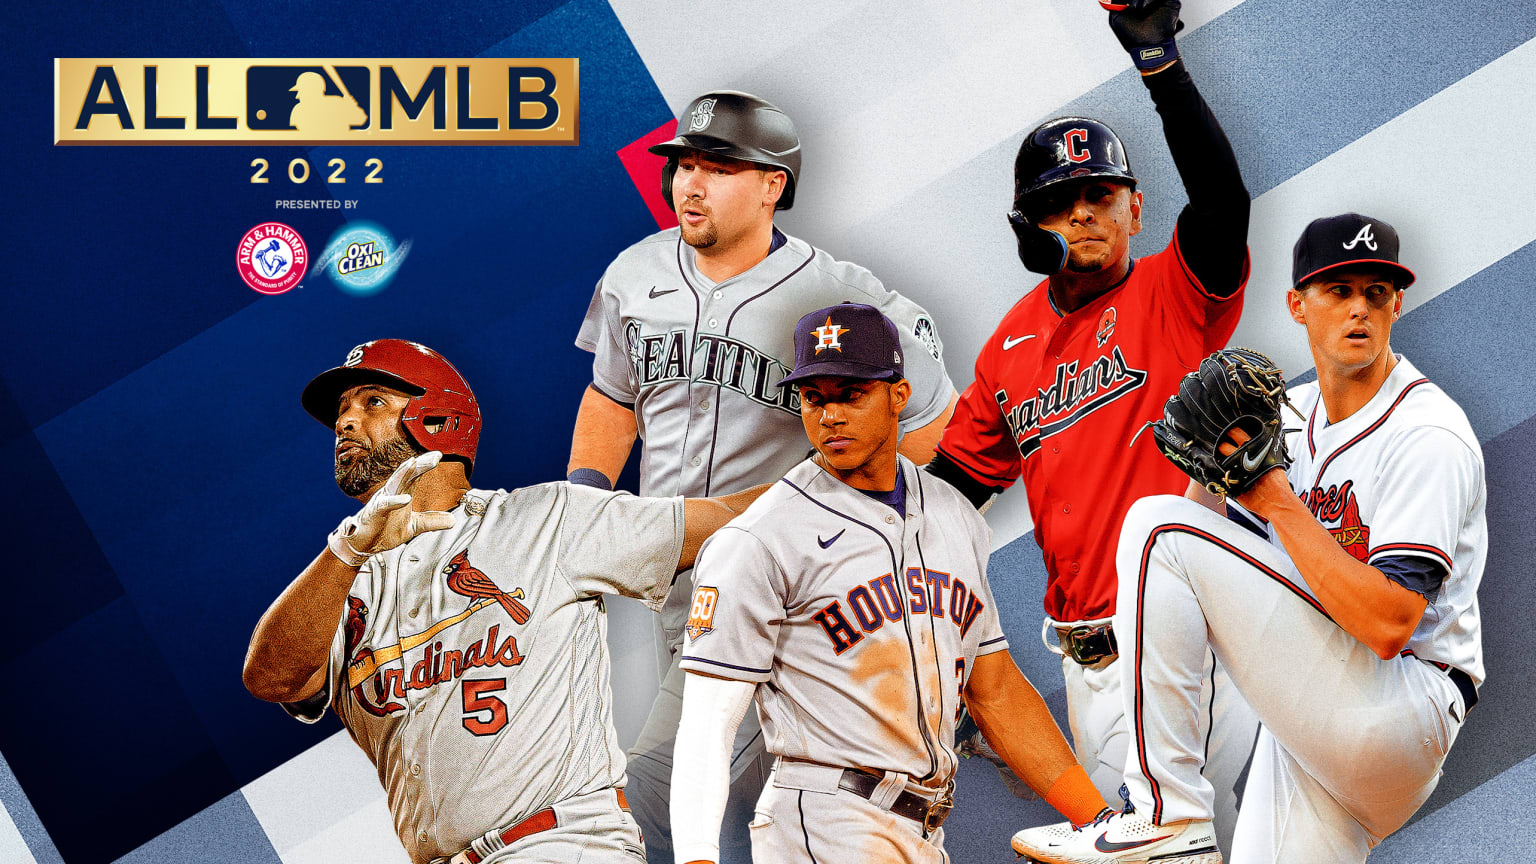 Five players are pictured next to the All-MLB logo